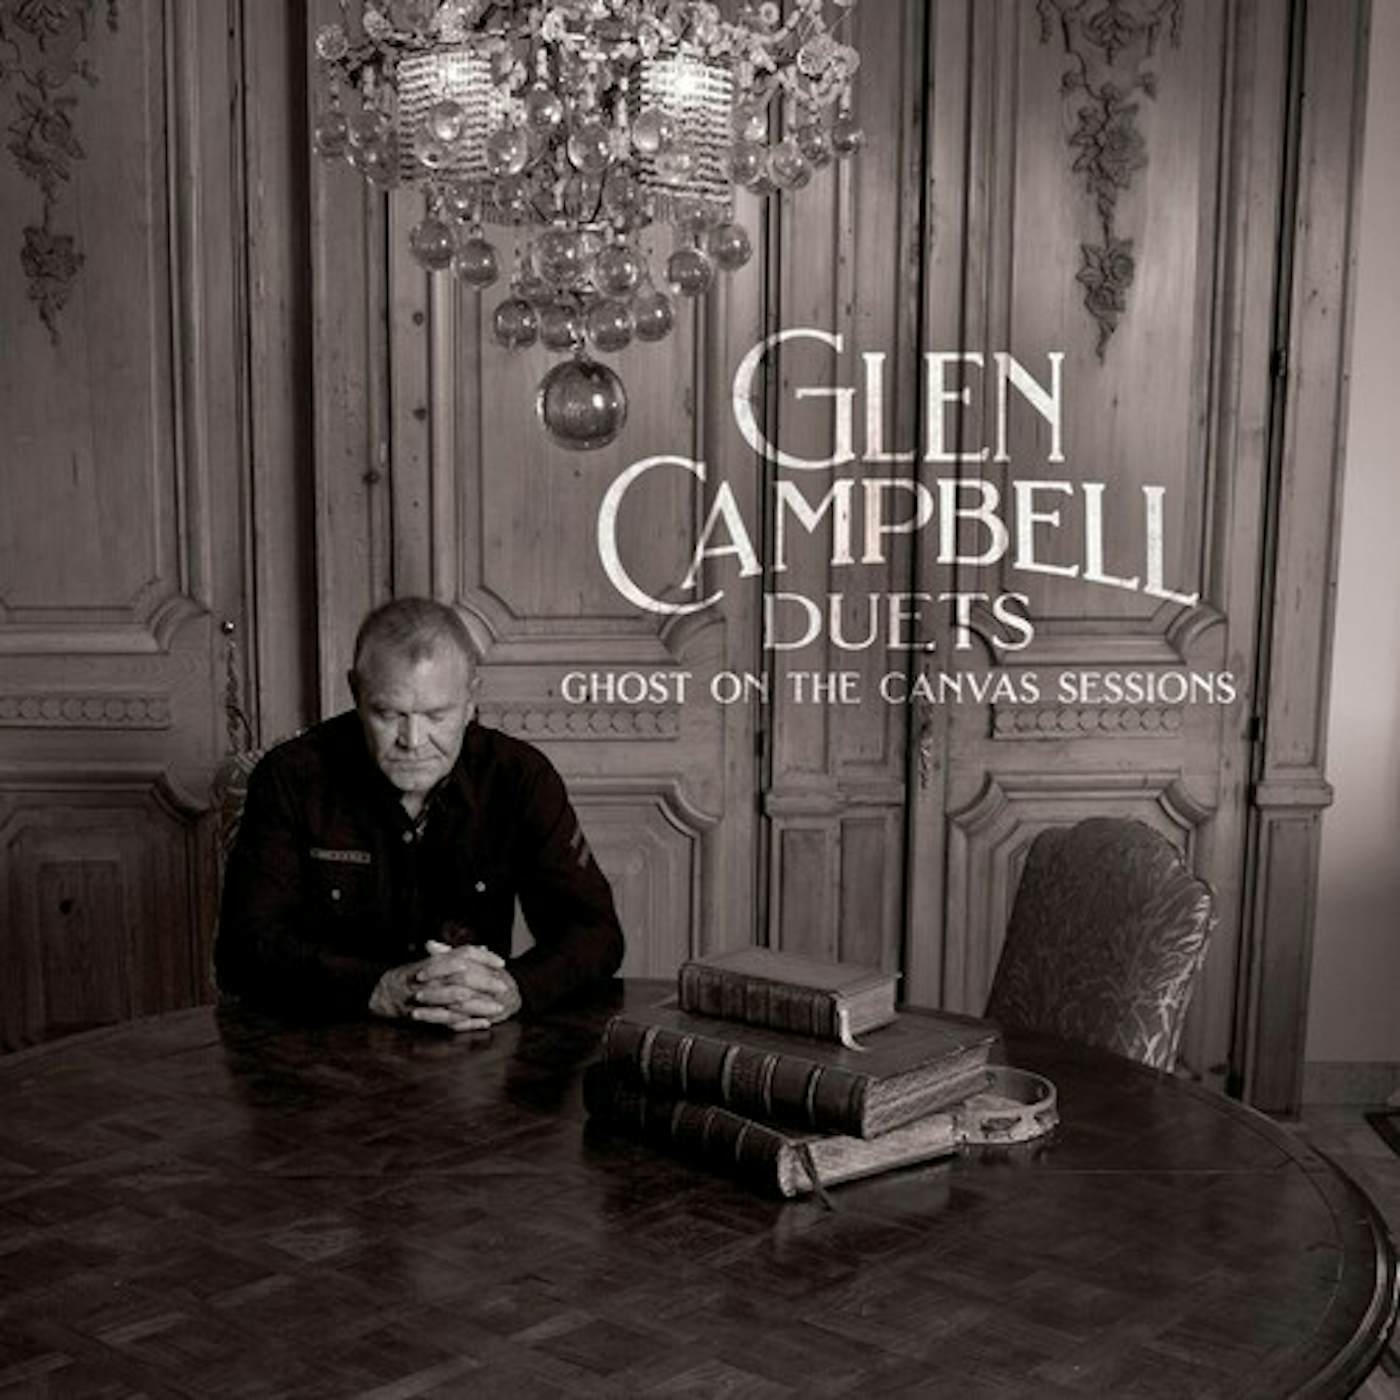 GLEN CAMPBELL DUETS: GHOST ON THE CANVAS SESSIONS CD